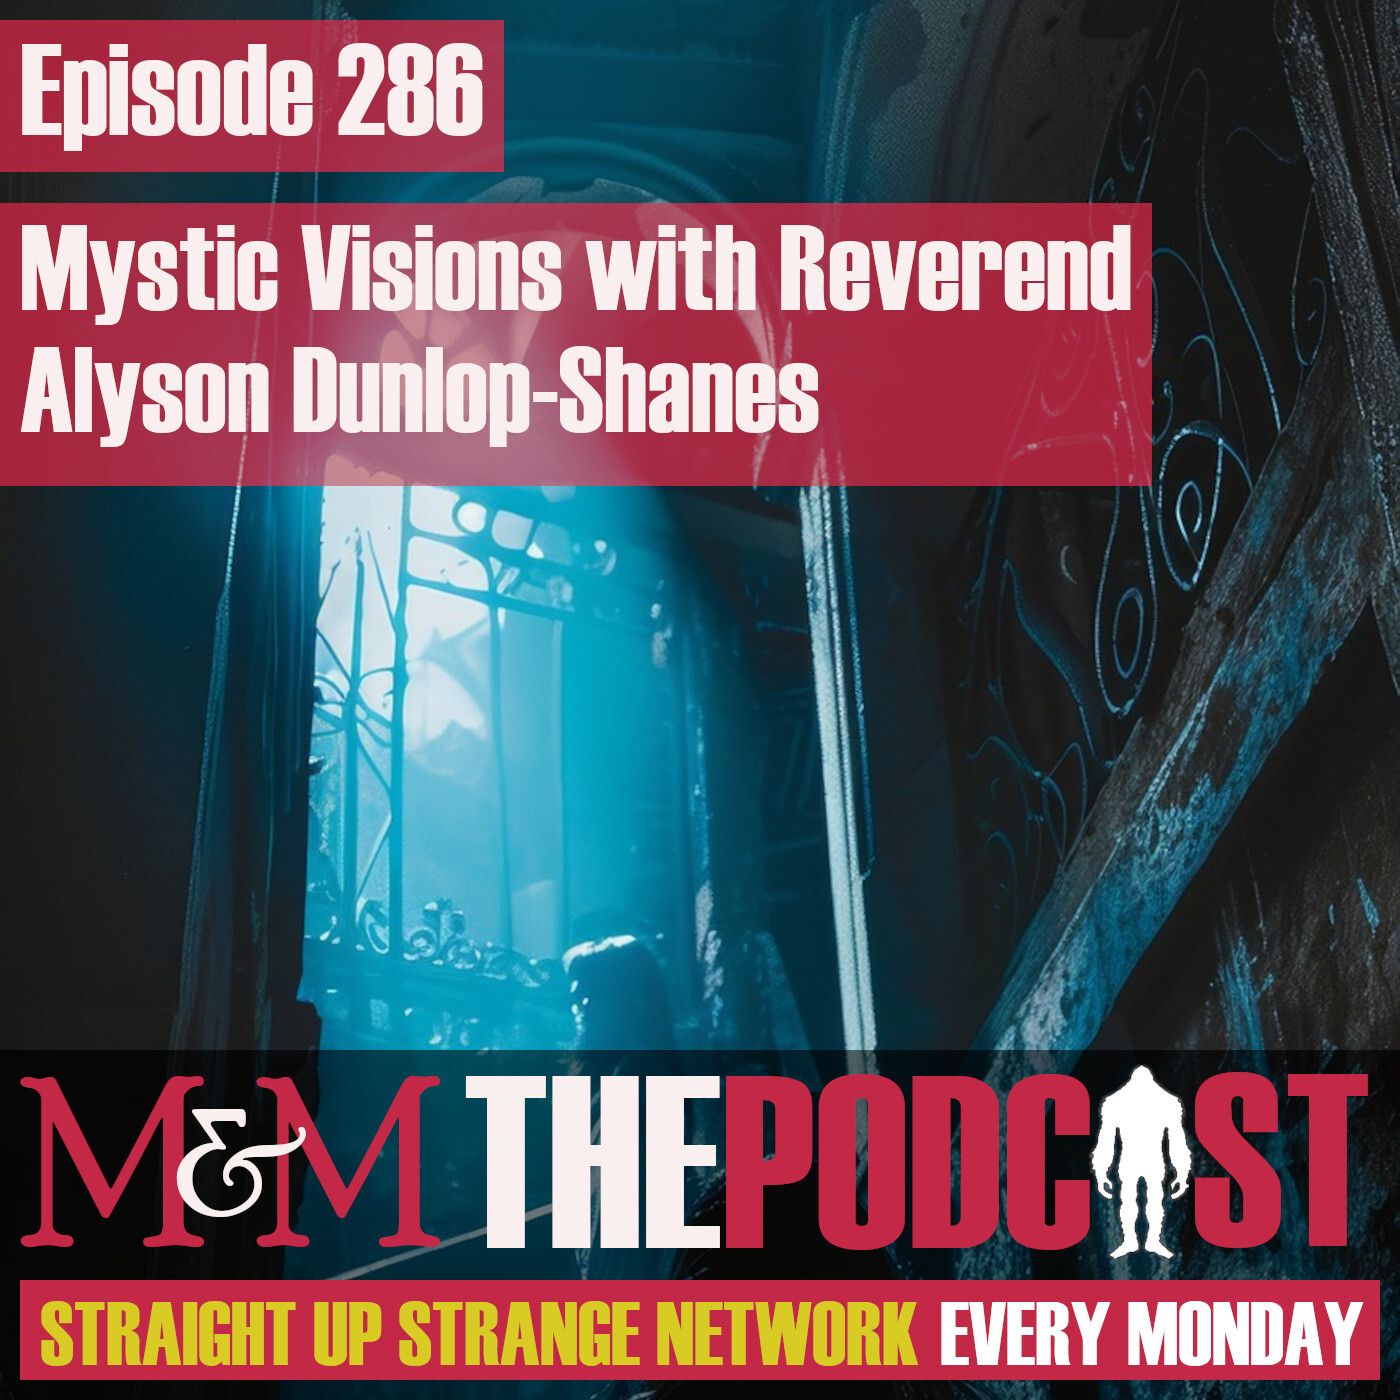 Mysteries and Monsters: Episode 286 Mystic Visions with Reverend Alyson Dunlop-Shanes